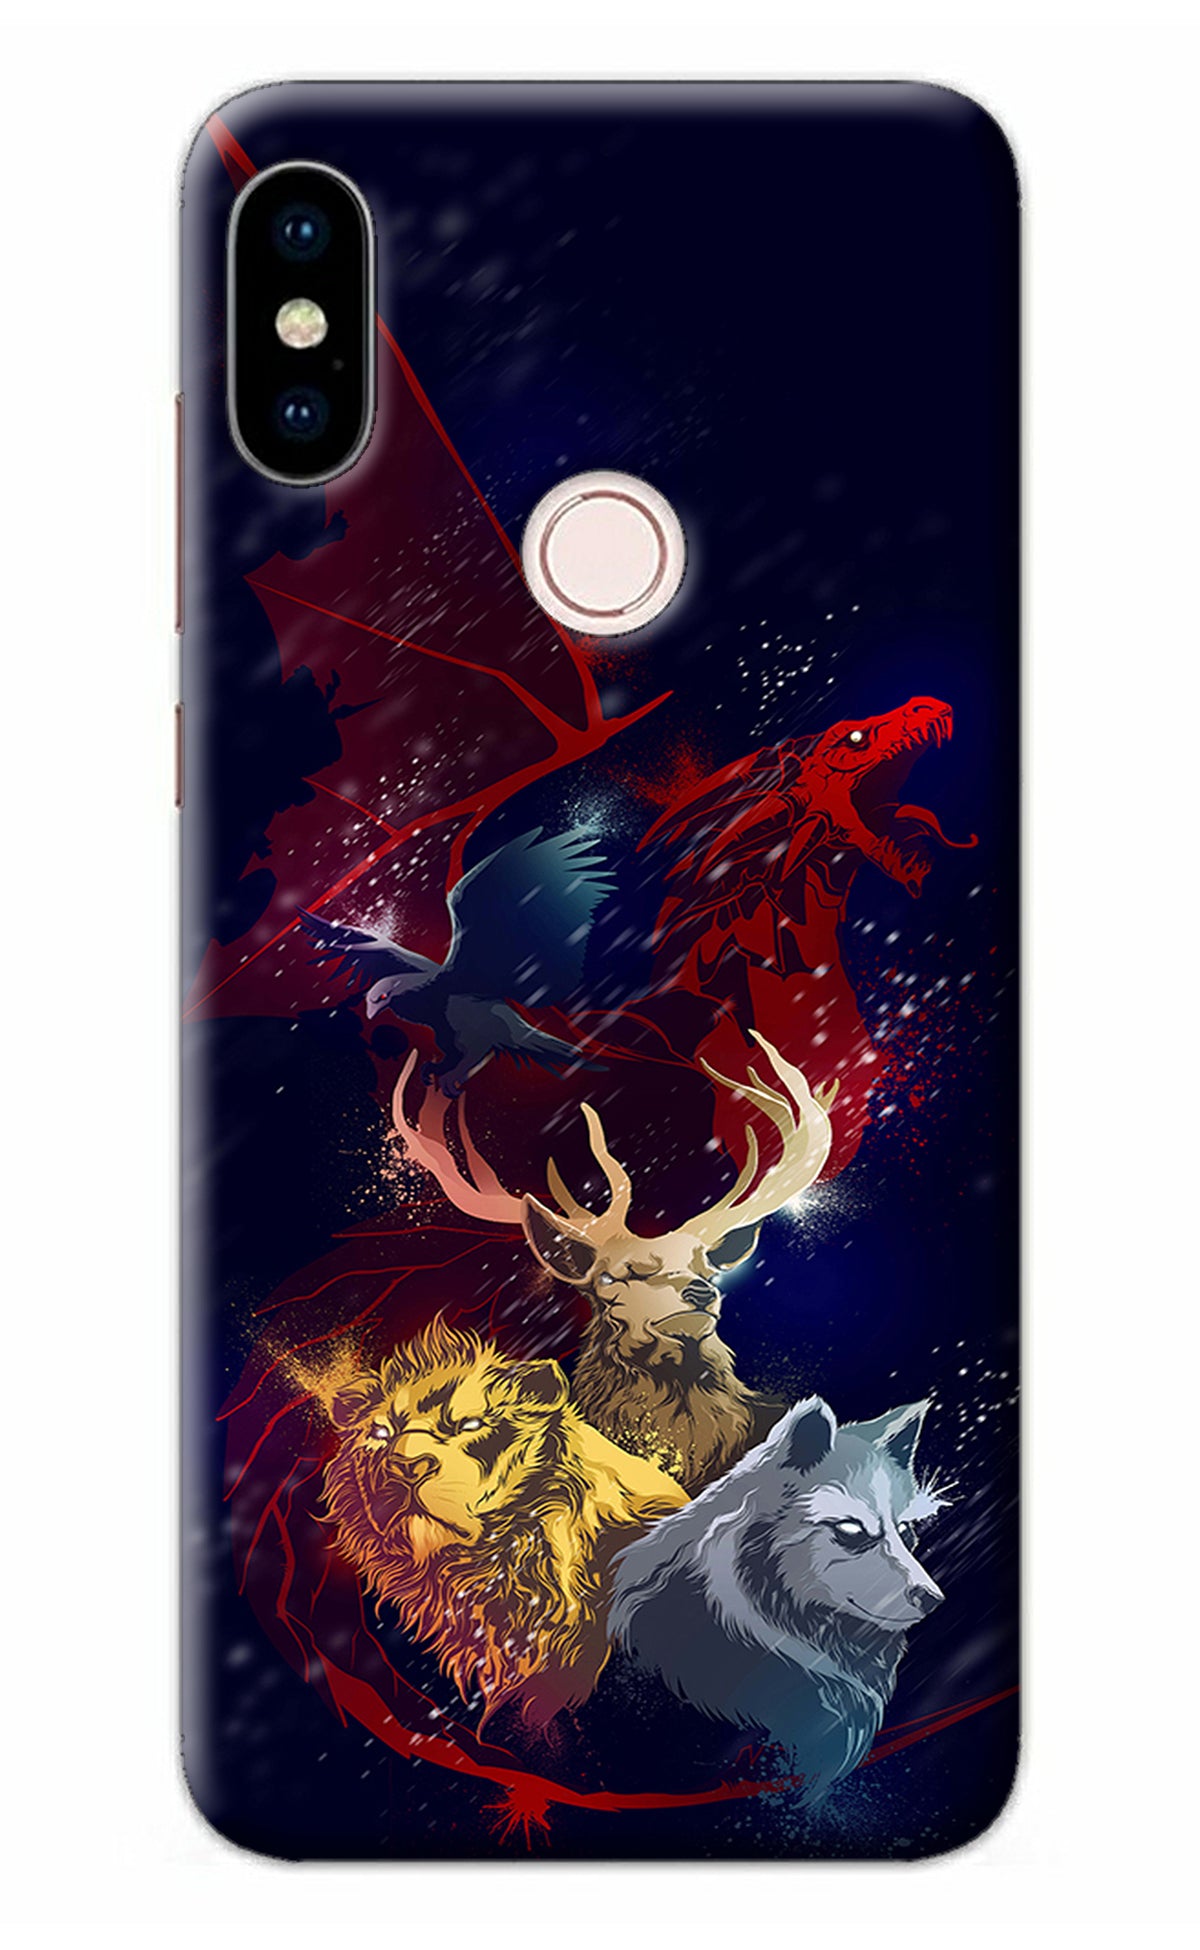 Game Of Thrones Redmi Note 5 Pro Back Cover